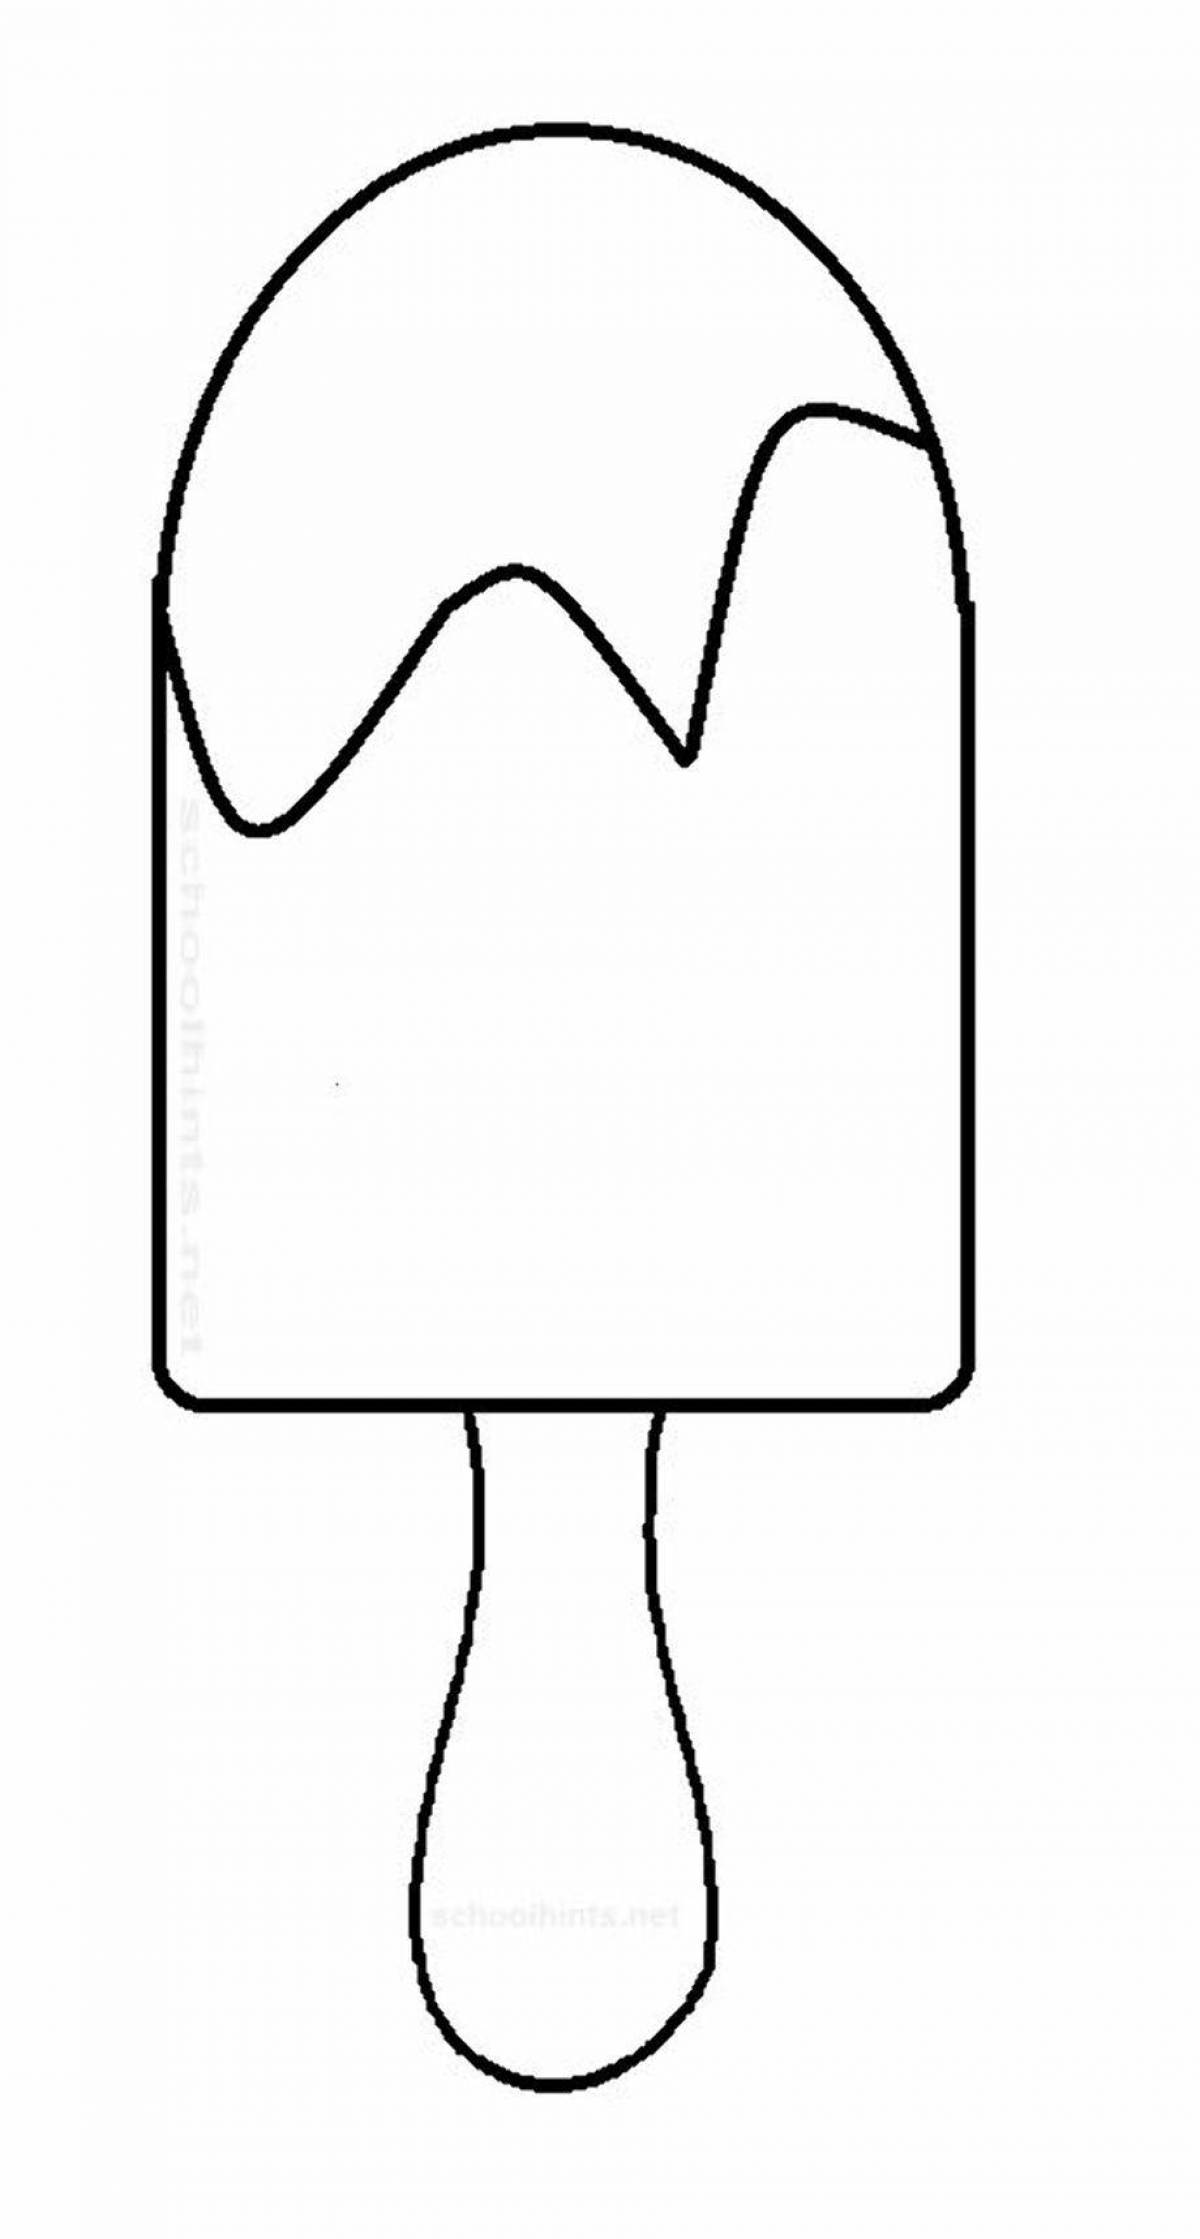 Fun popsicle ice cream coloring page